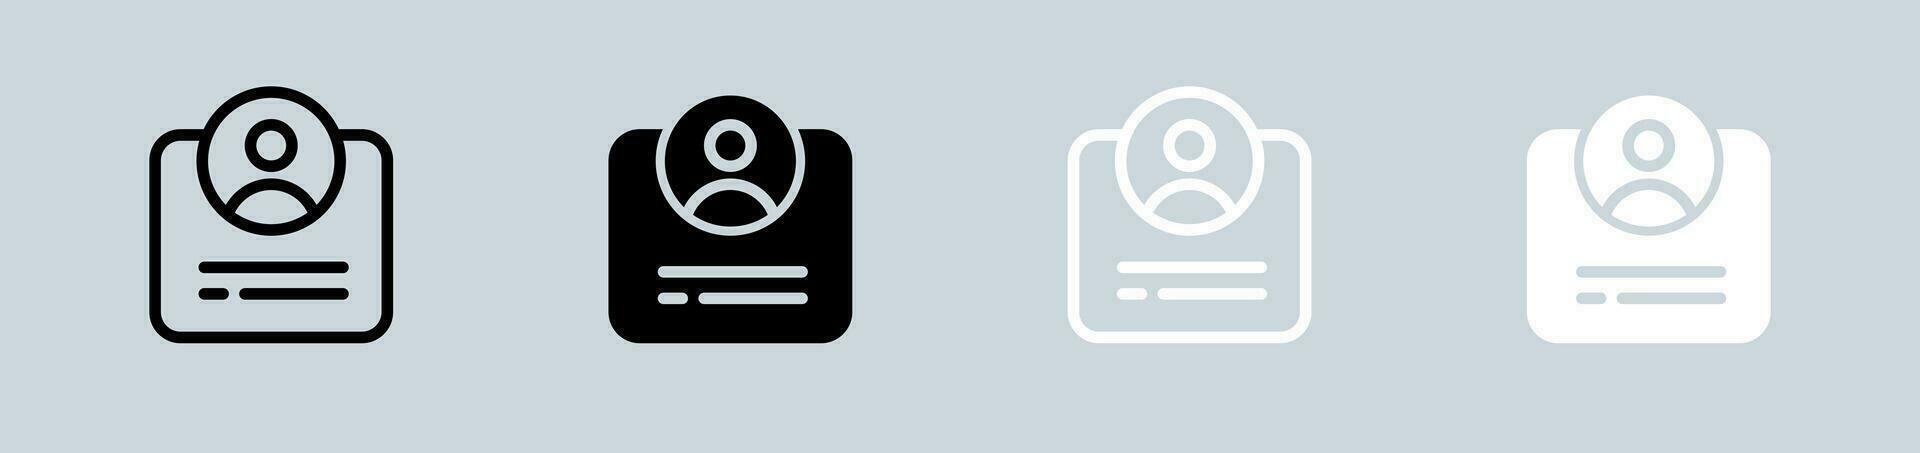 Registration icon set in black and white. New user signs vector illustration.